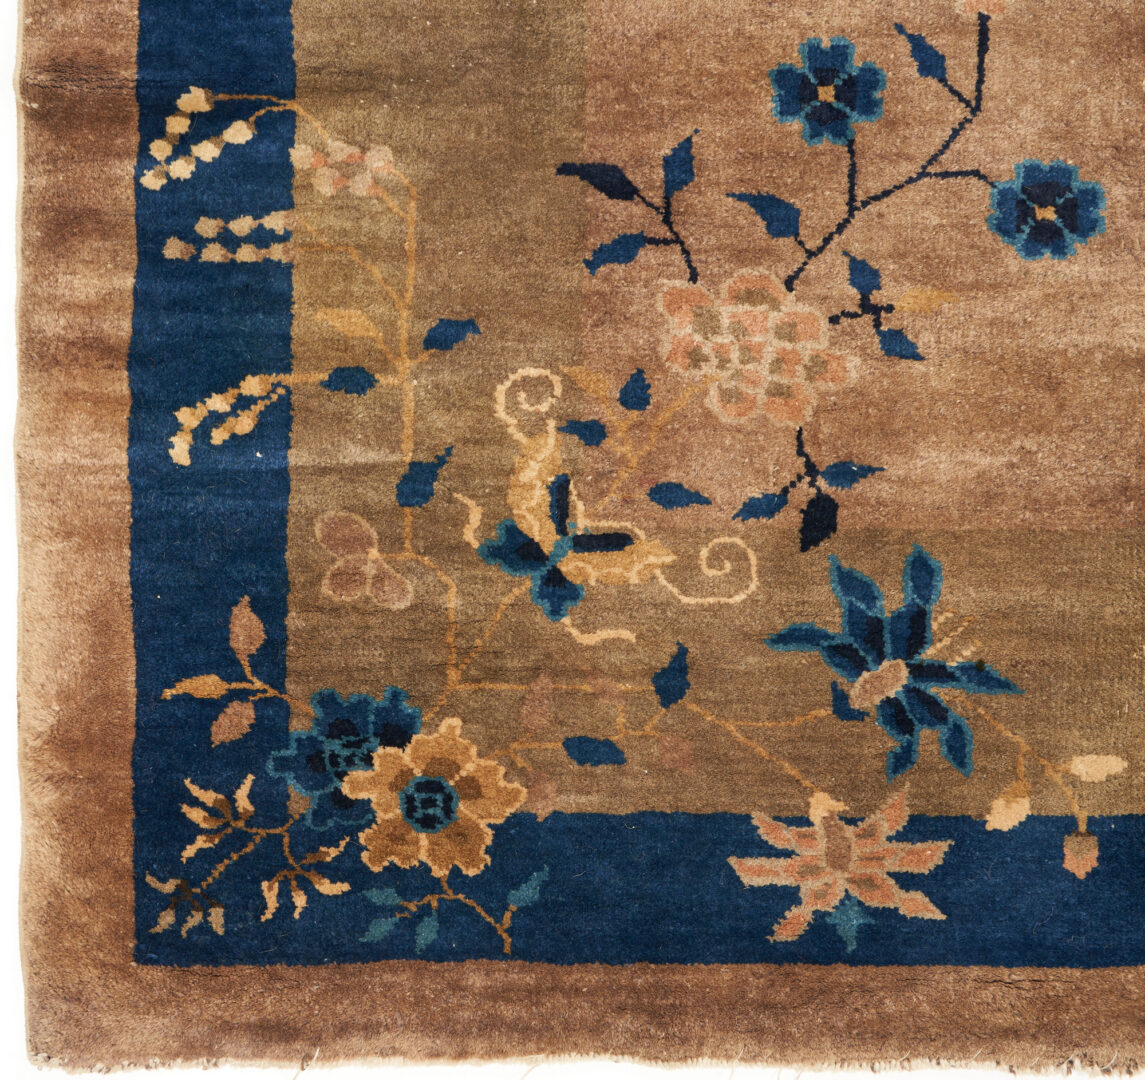 Lot 40: Chinese Art Deco Rug